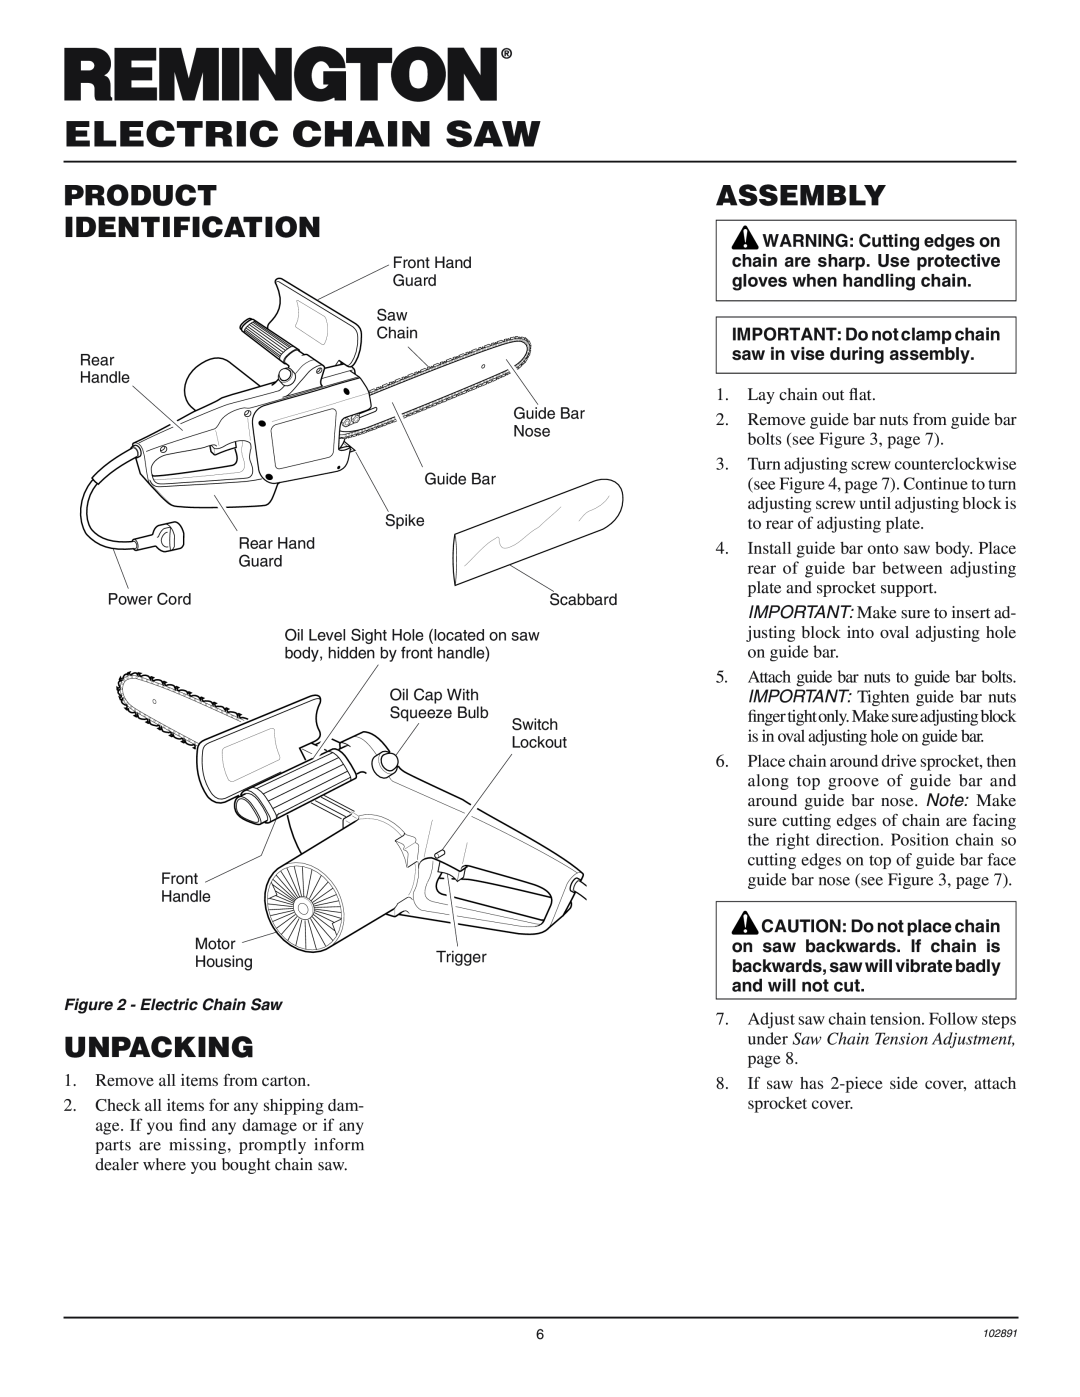 Desa 100271-01 Product Identification, Assembly, Unpacking, IMPORTANT Do not clamp chain saw in vise during assembly 